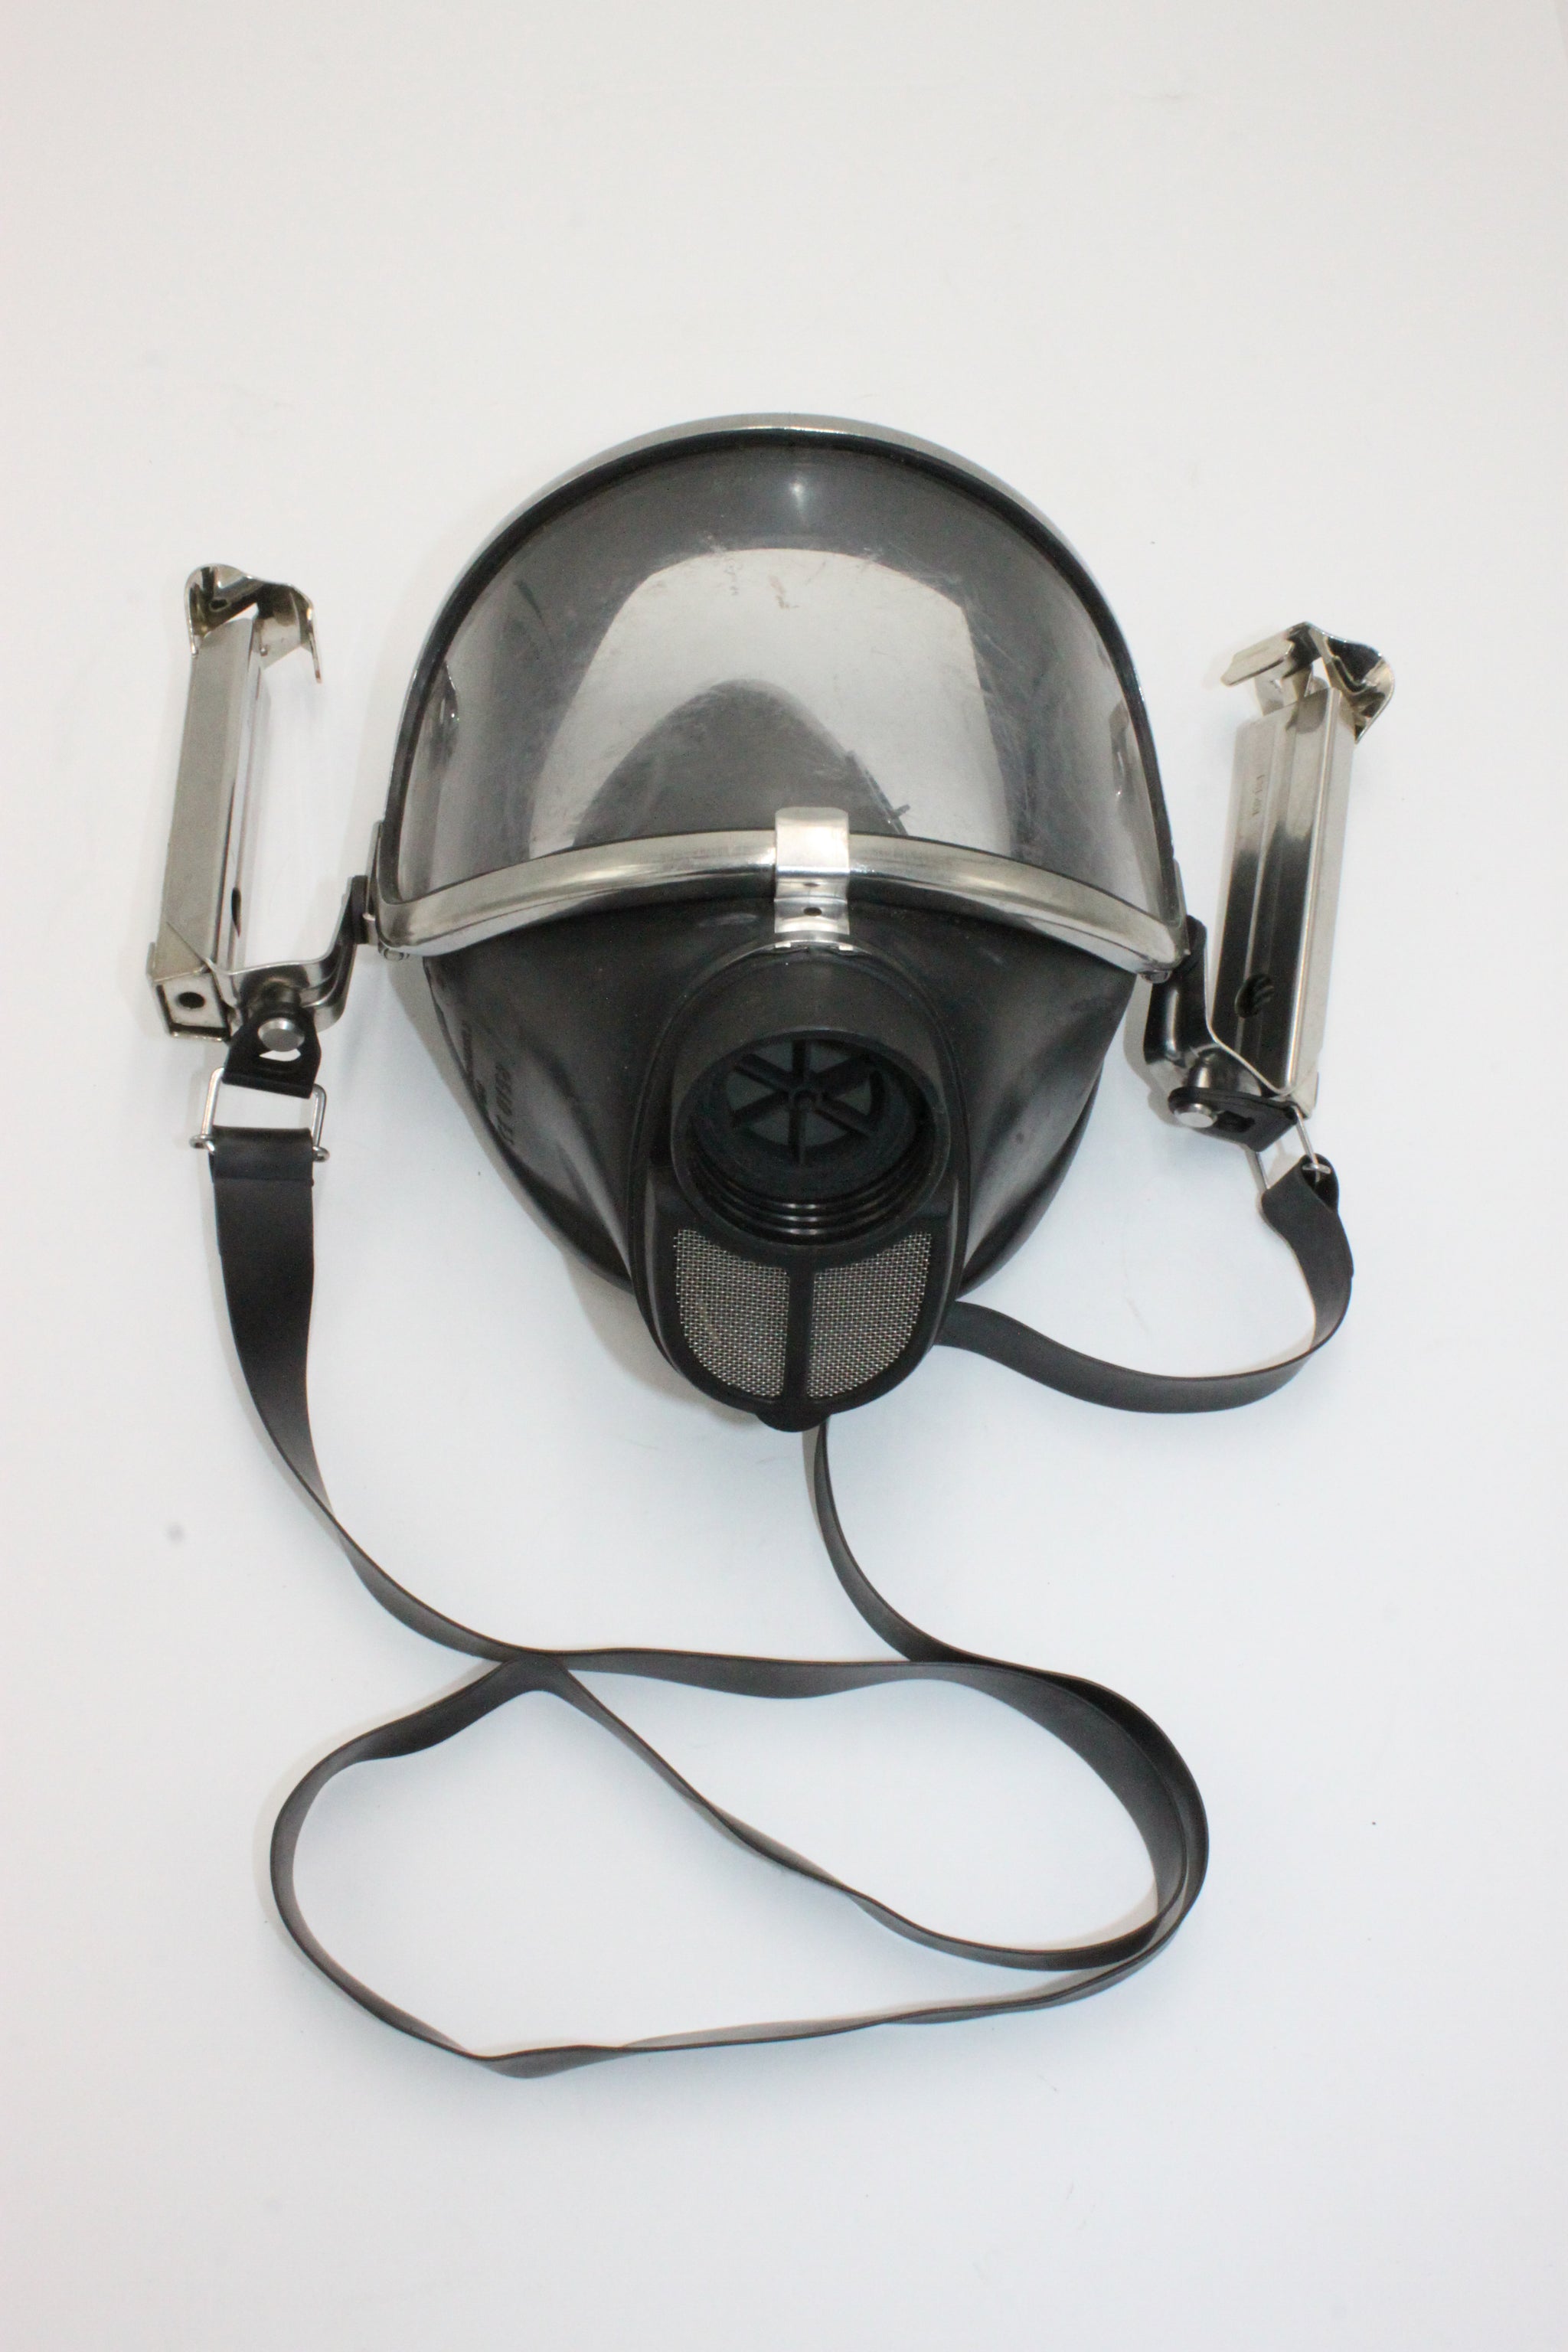 Italian Military Police Riot Helmet with Face Shield Does NOT take the attachment Gas Mask (Helmet Only)